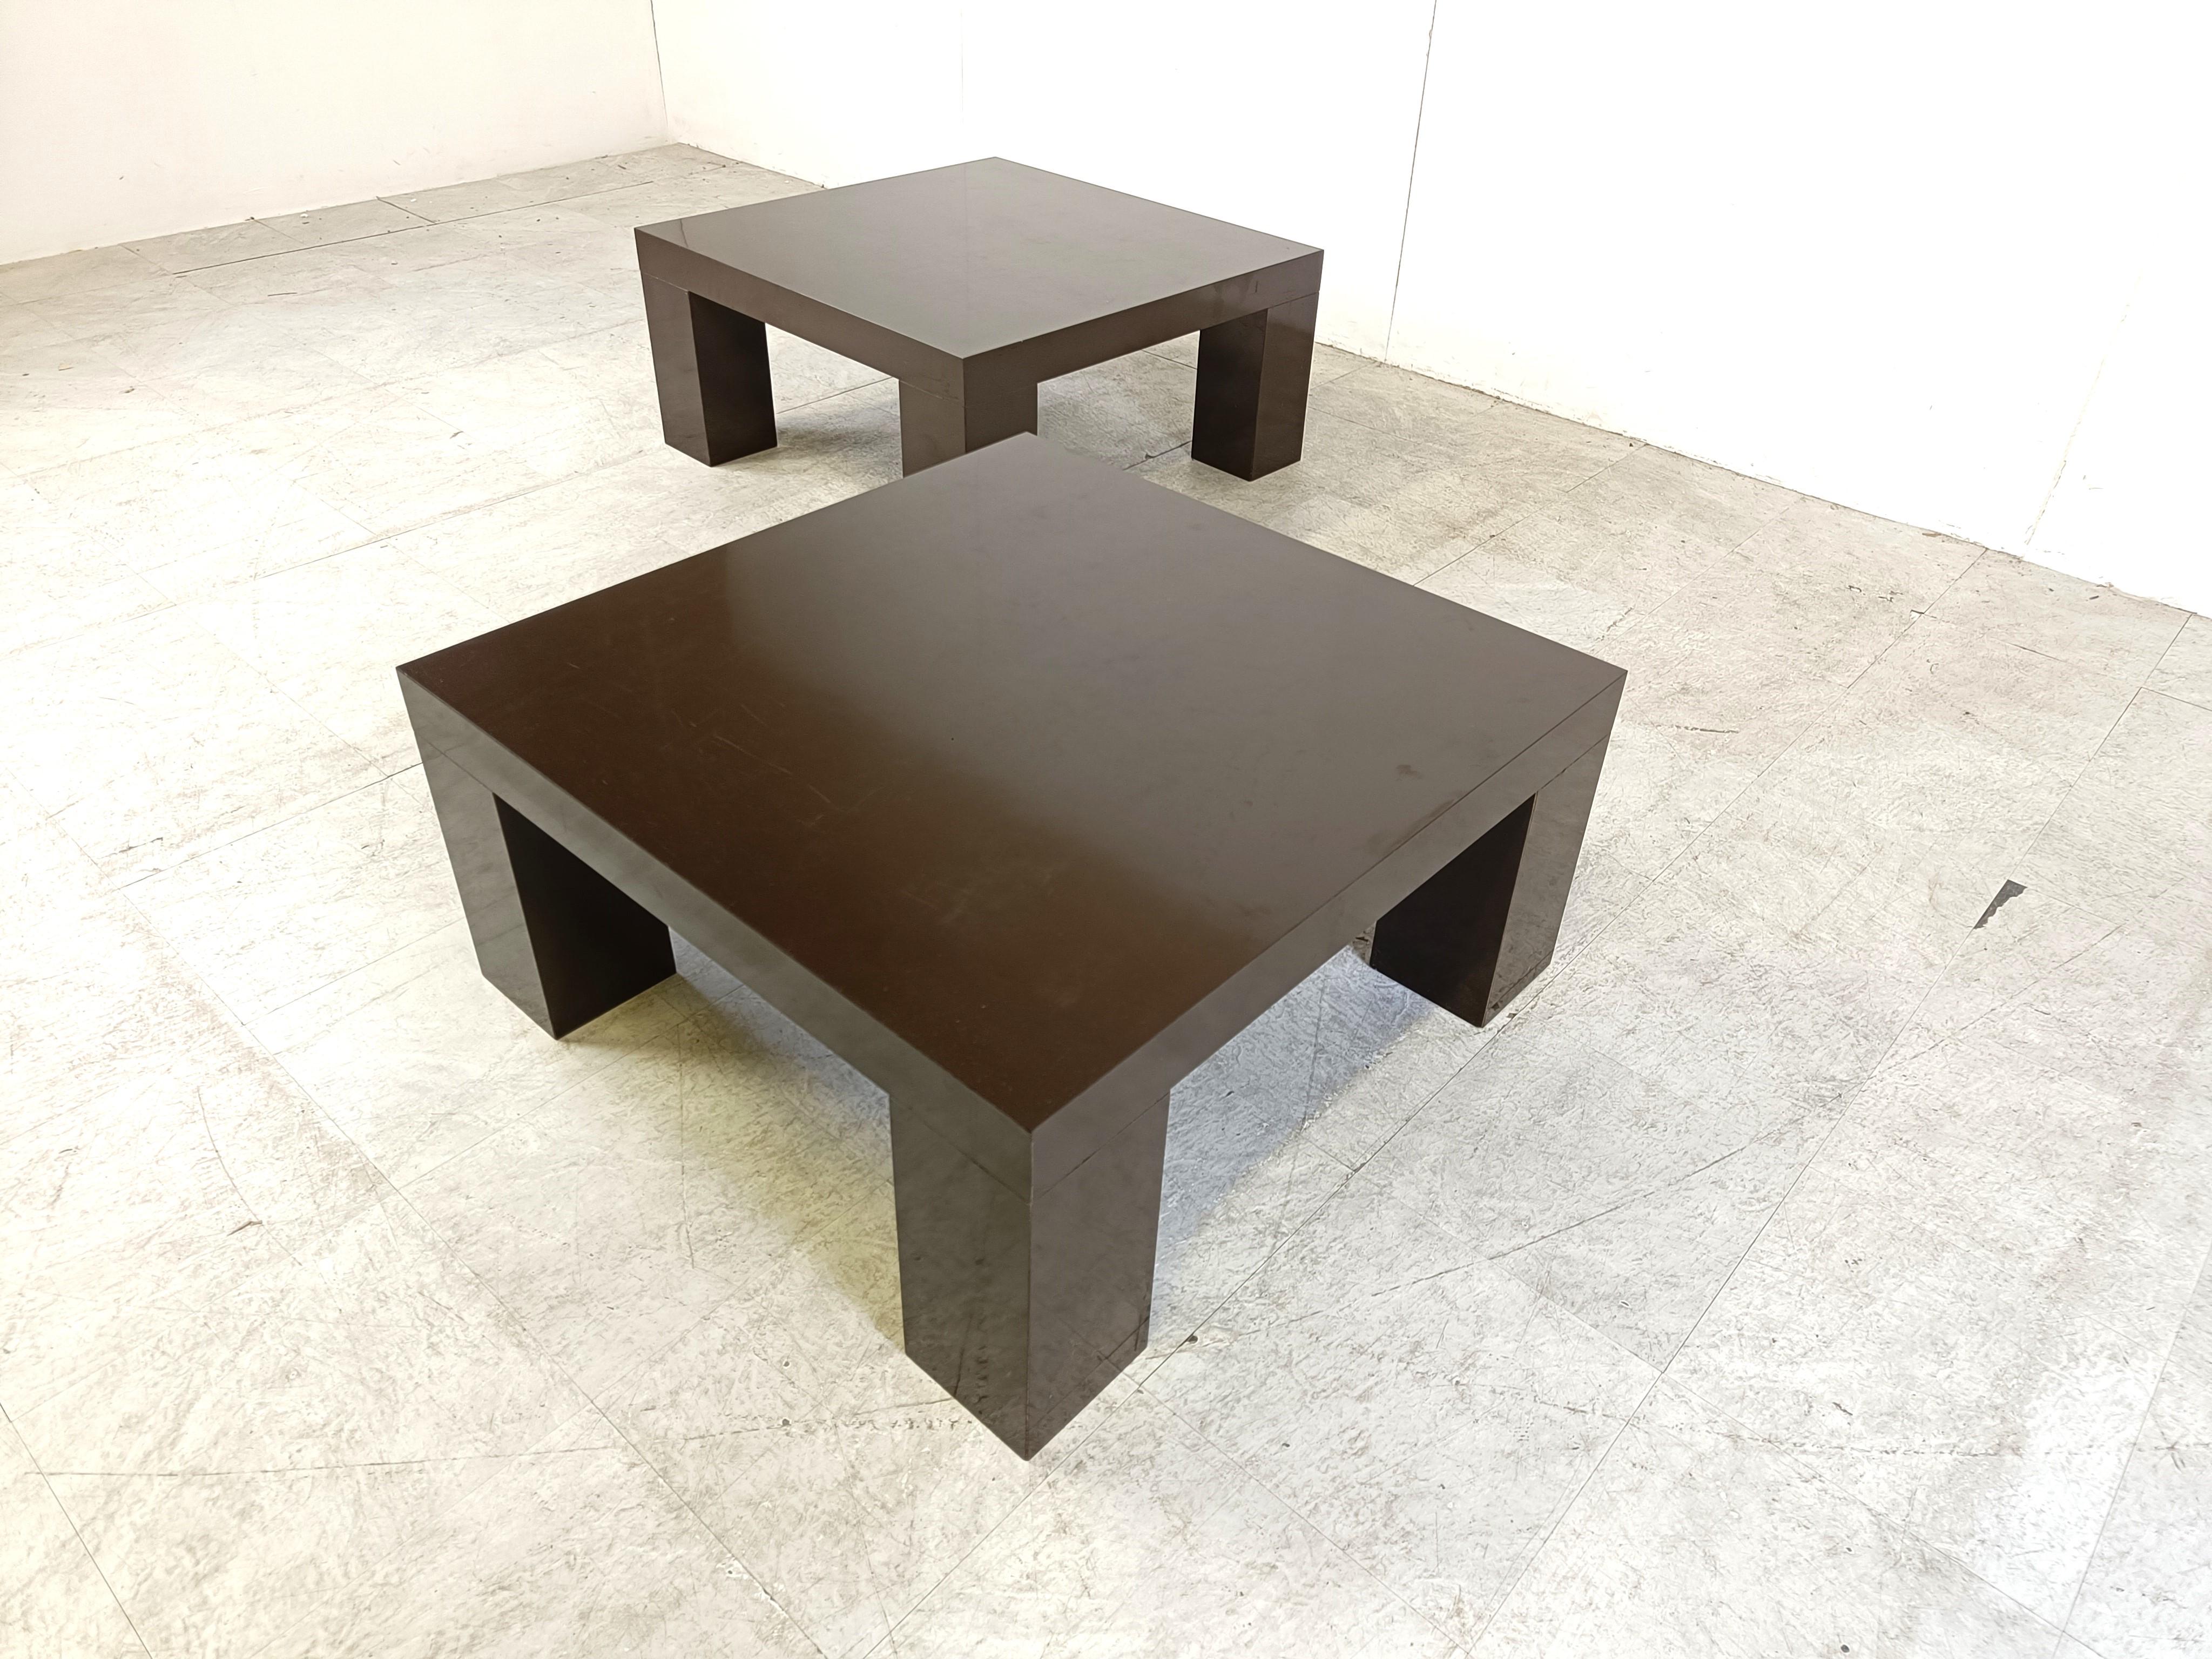 Seventies brown lacquer coffee or side tables.

These where purchased together with a willy rizzo coffee  table (model alveo) and formed a part of the living room in a very posh house.

We cannot confirm these are Willy Rizzo/Mario Sabot - but these